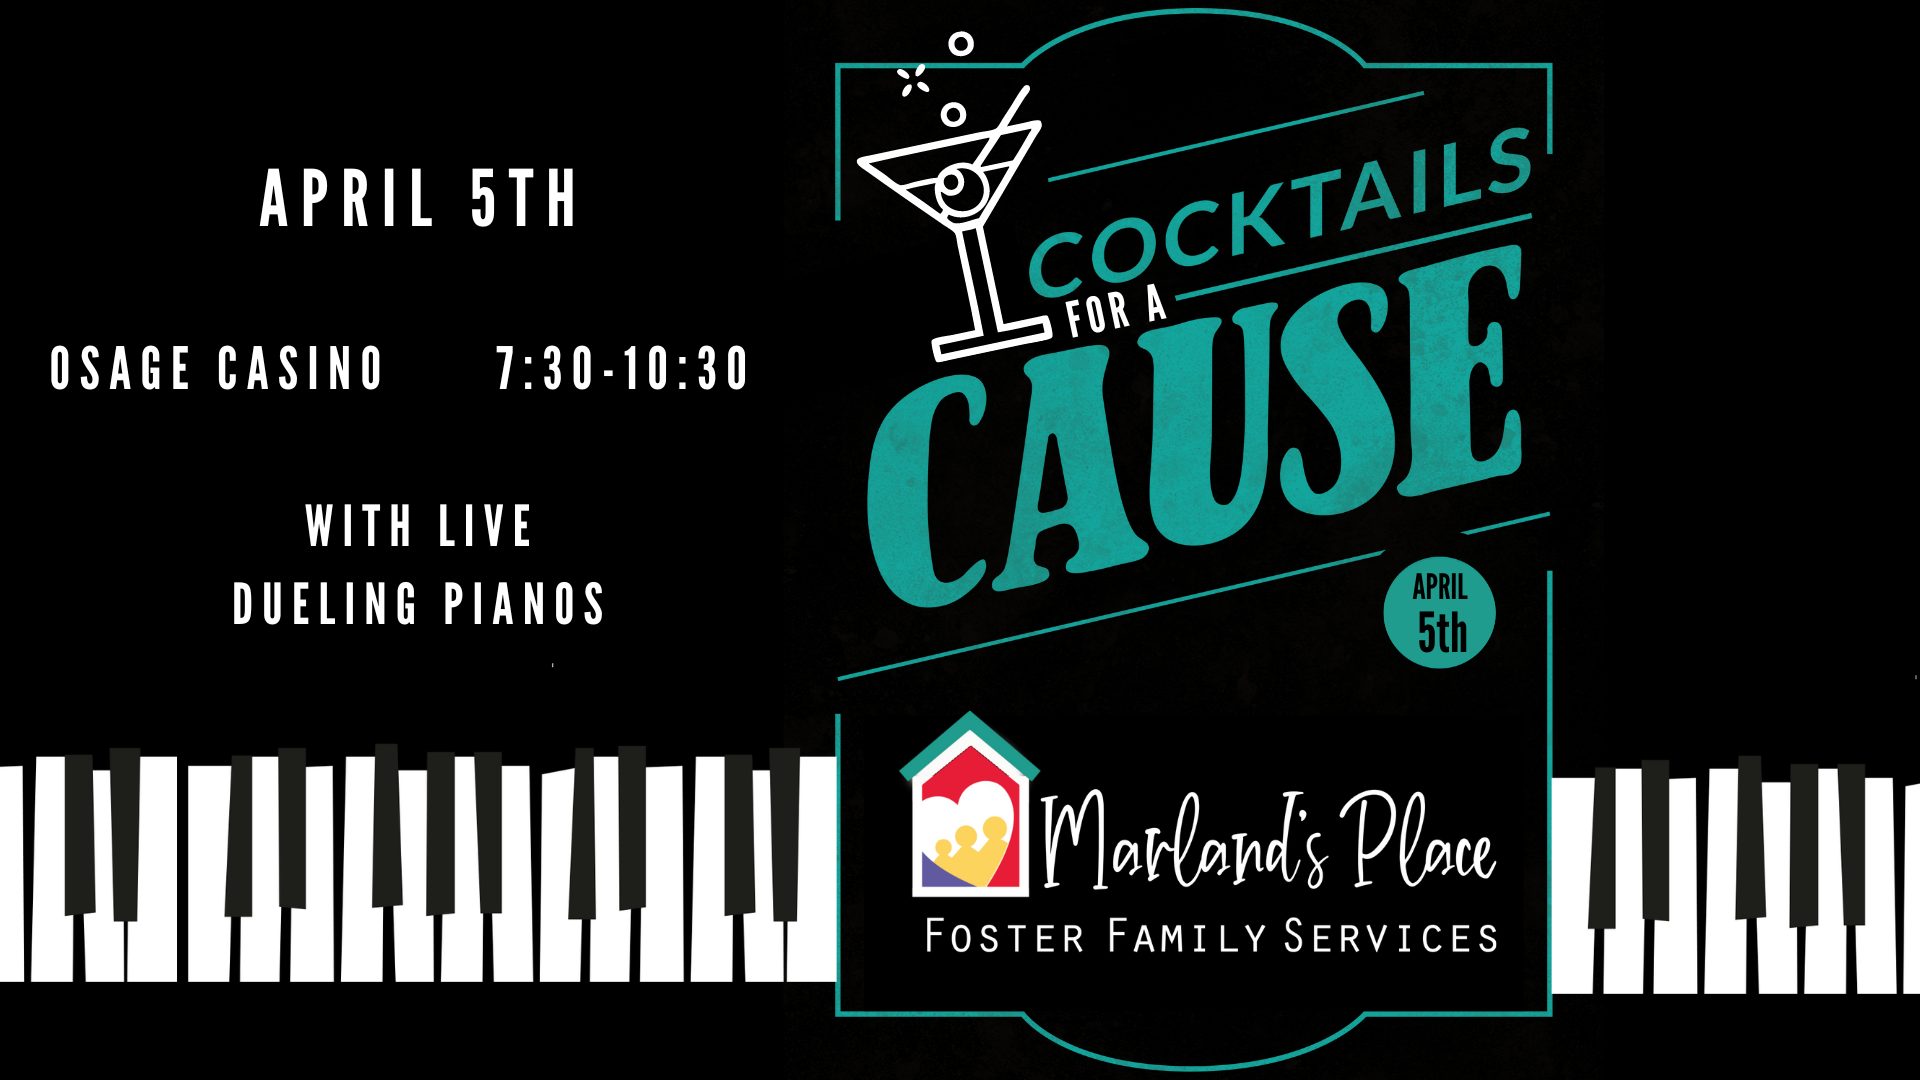 Marland’s Place “Cocktails for a Cause” Fundraiser This Friday